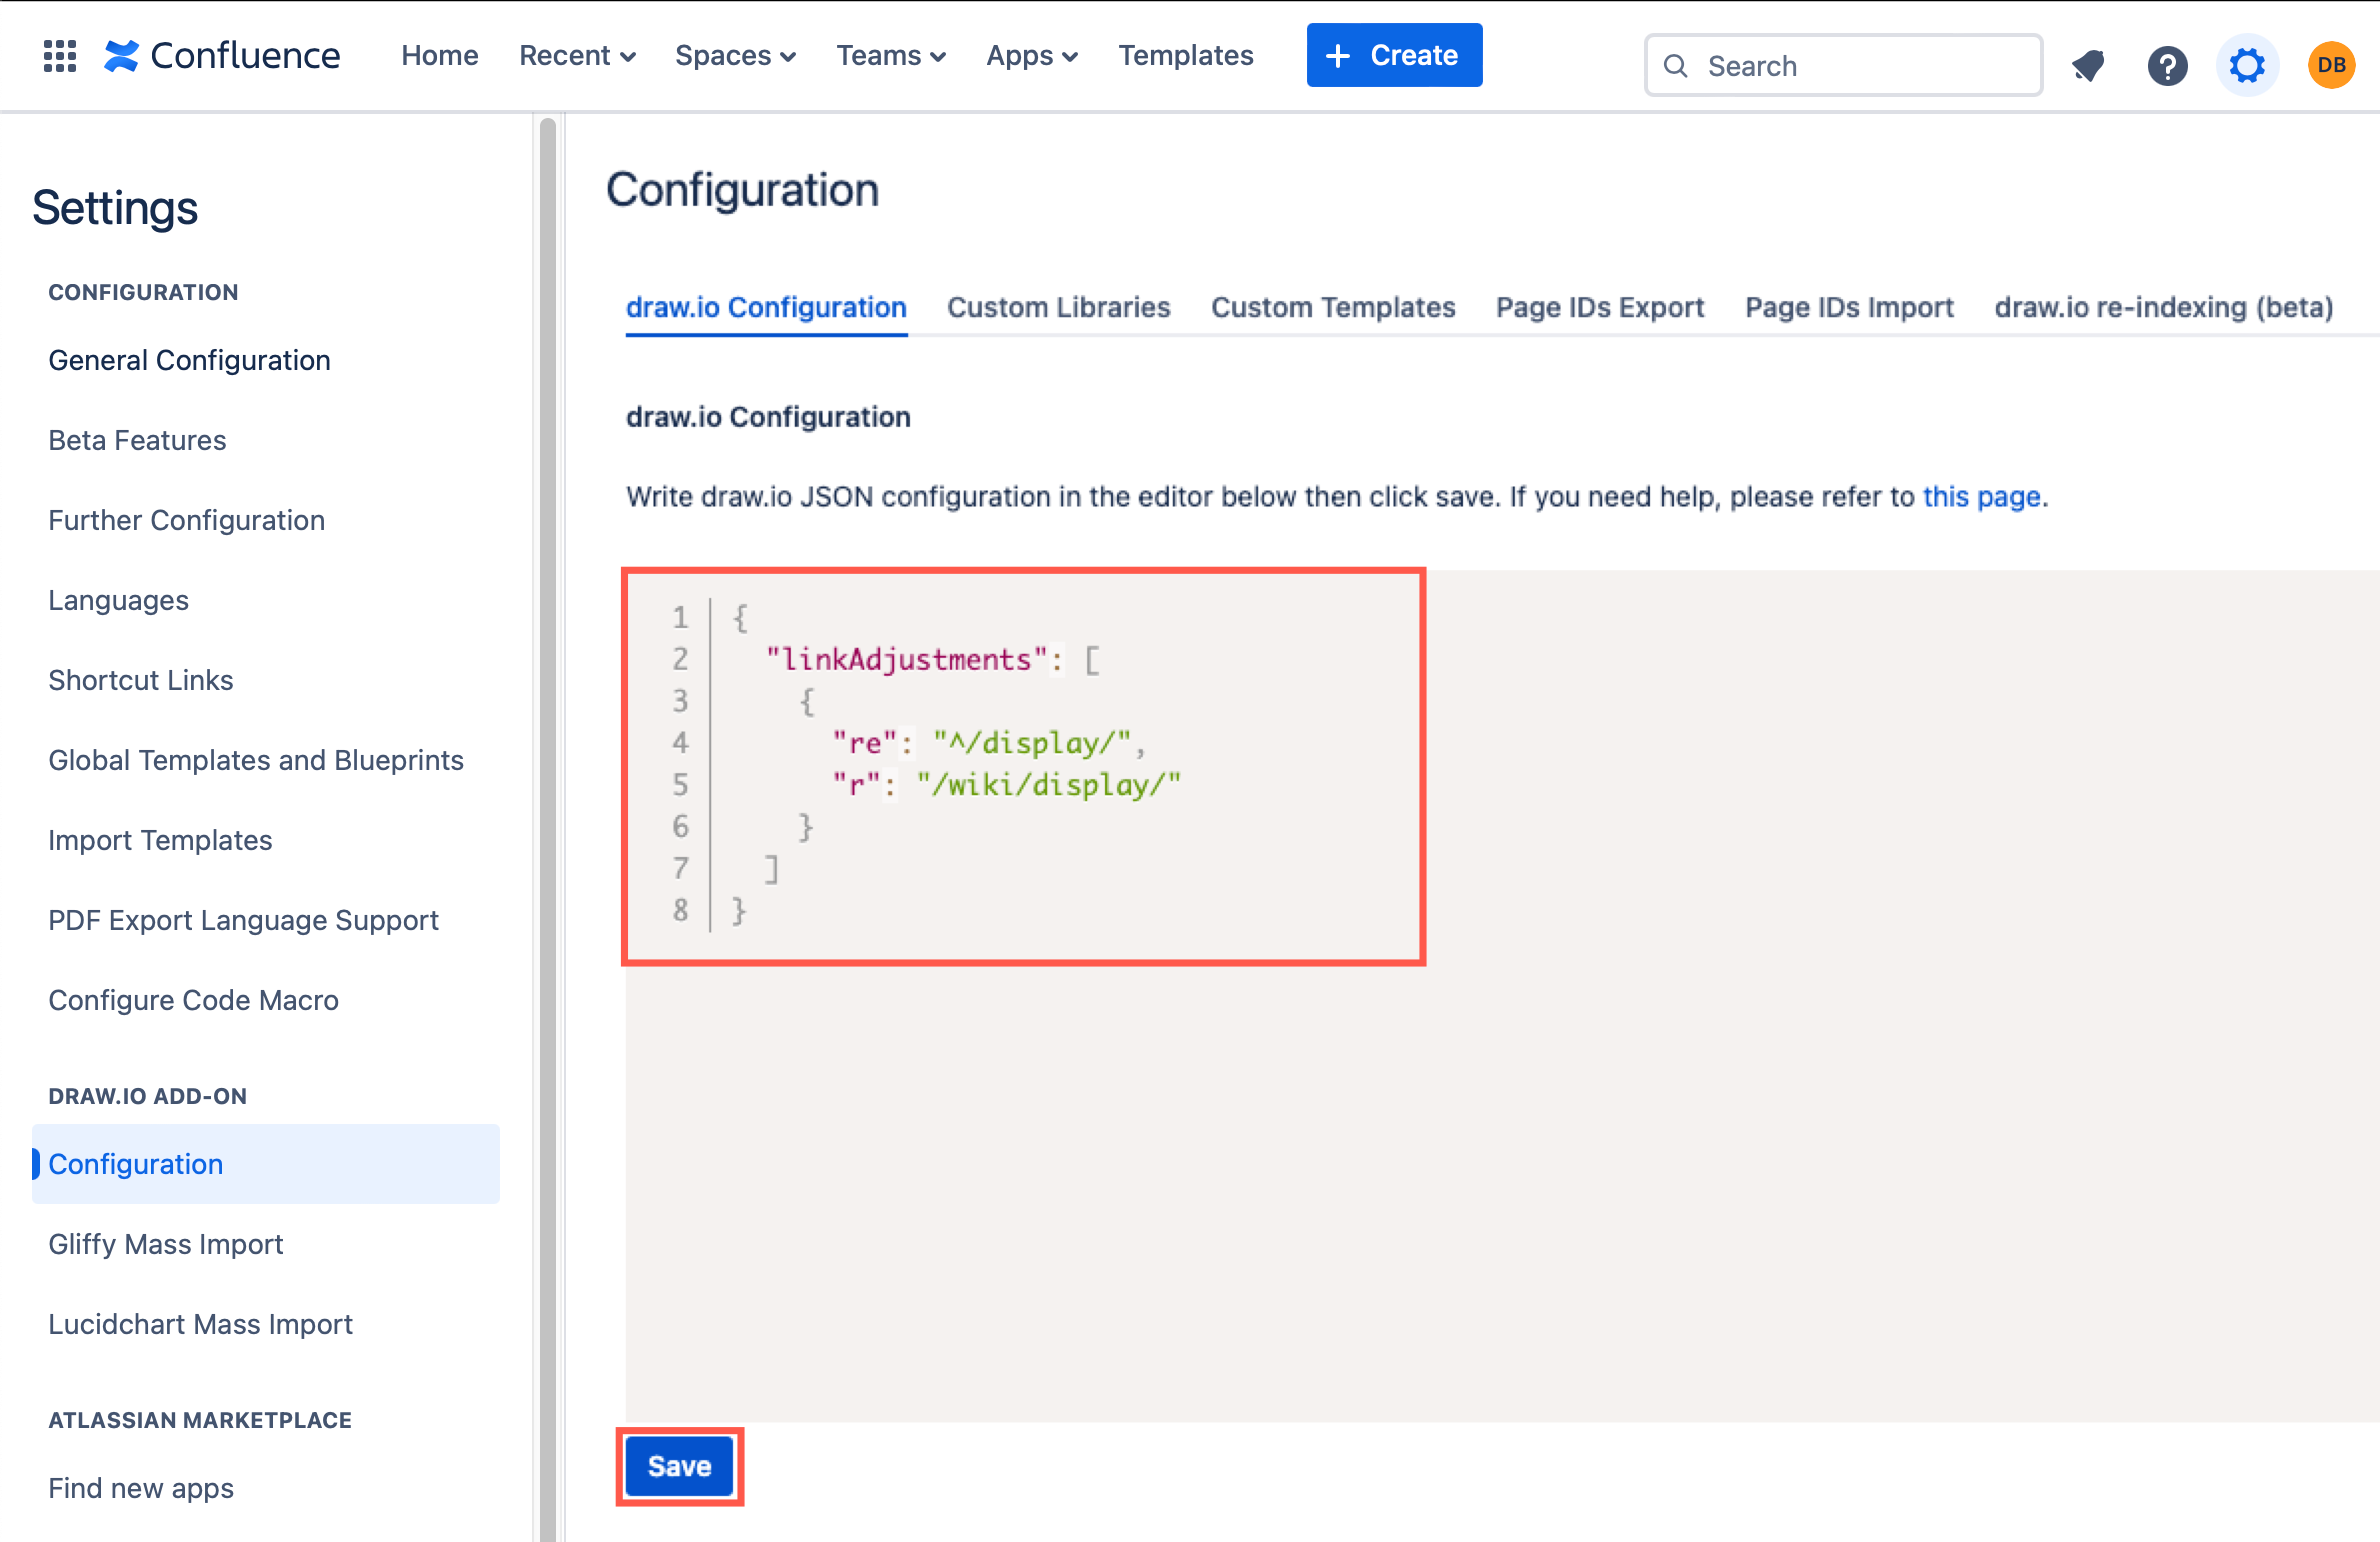 Paste the configuration command you copied in a previous step into the draw.io Configuration in your Confluence Cloud instance